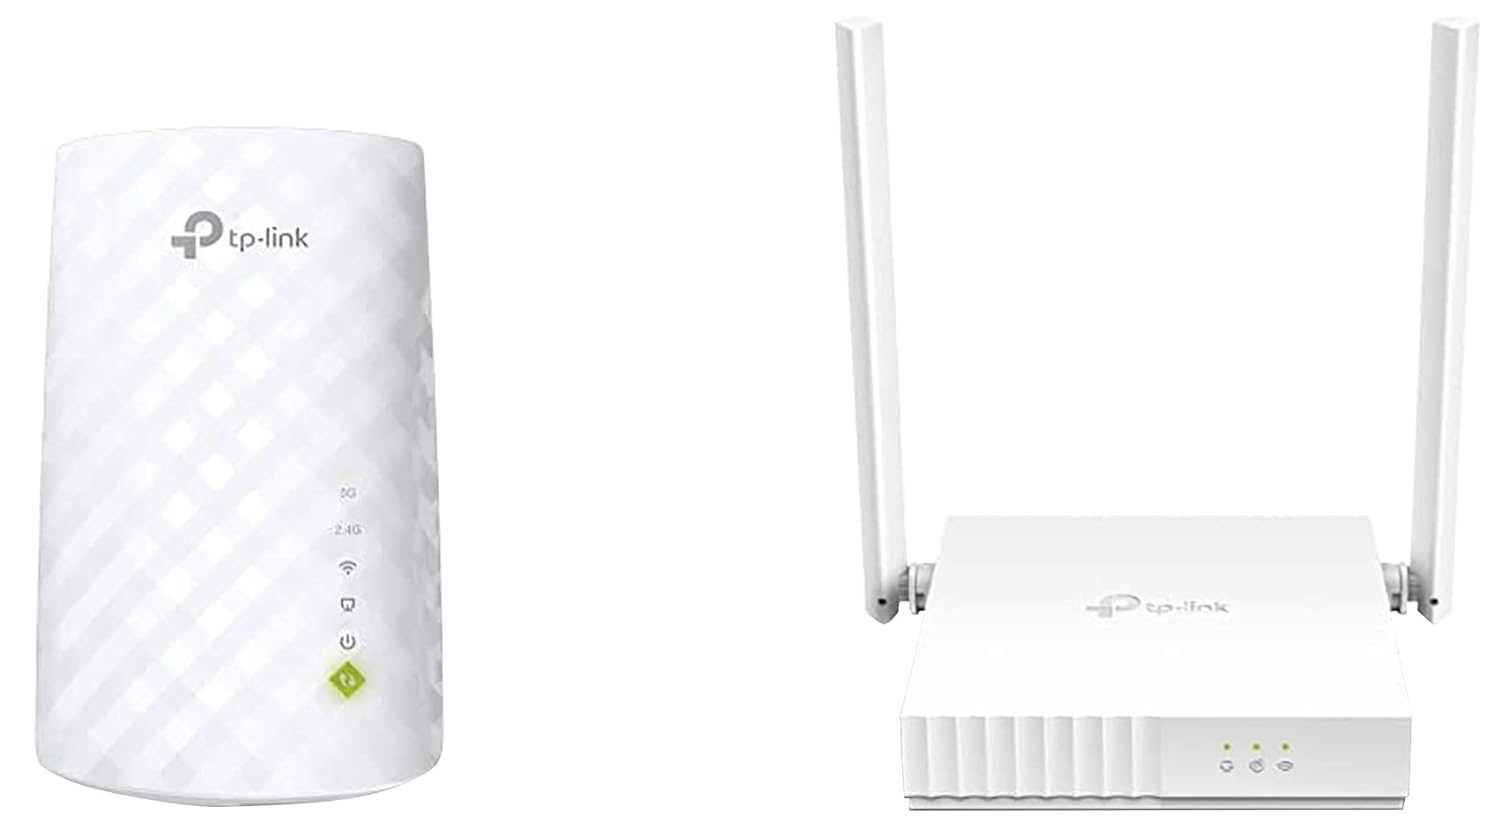 TP-Link AC750 WiFi Range Extender | Up to 750Mbps | Dual Band WiFi Extender, Repeater & TL-WR820N 300 Mbps Speed Wireless WiFi Router, Easy Setup, IPv6 Compatible, Supports Parent Control